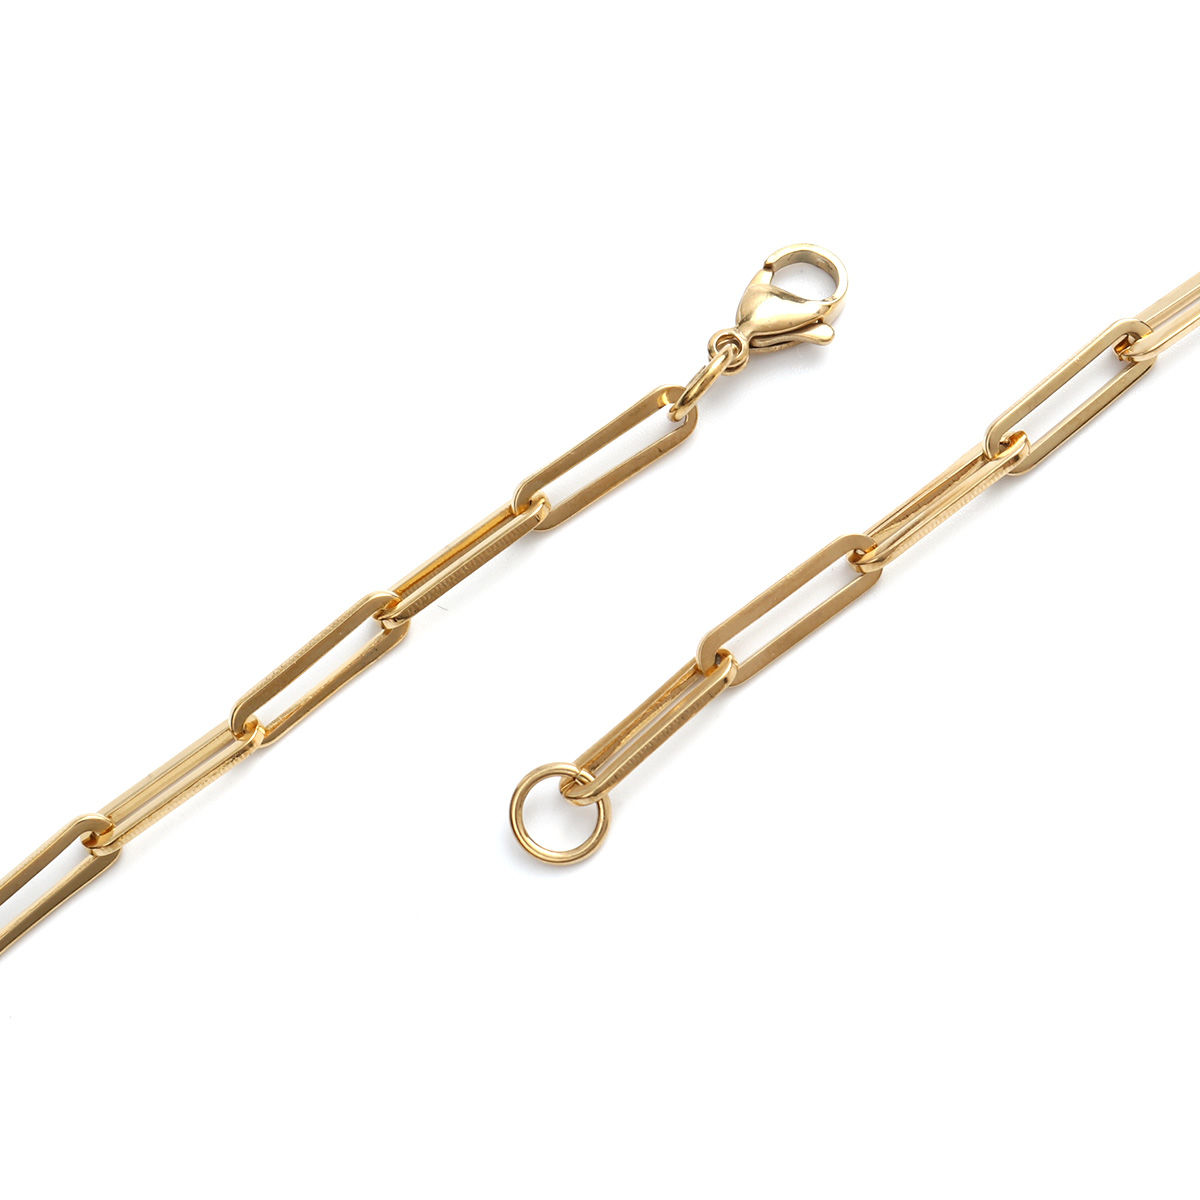  DoreenBeads Gold Paperclip Chain Necklace for Women